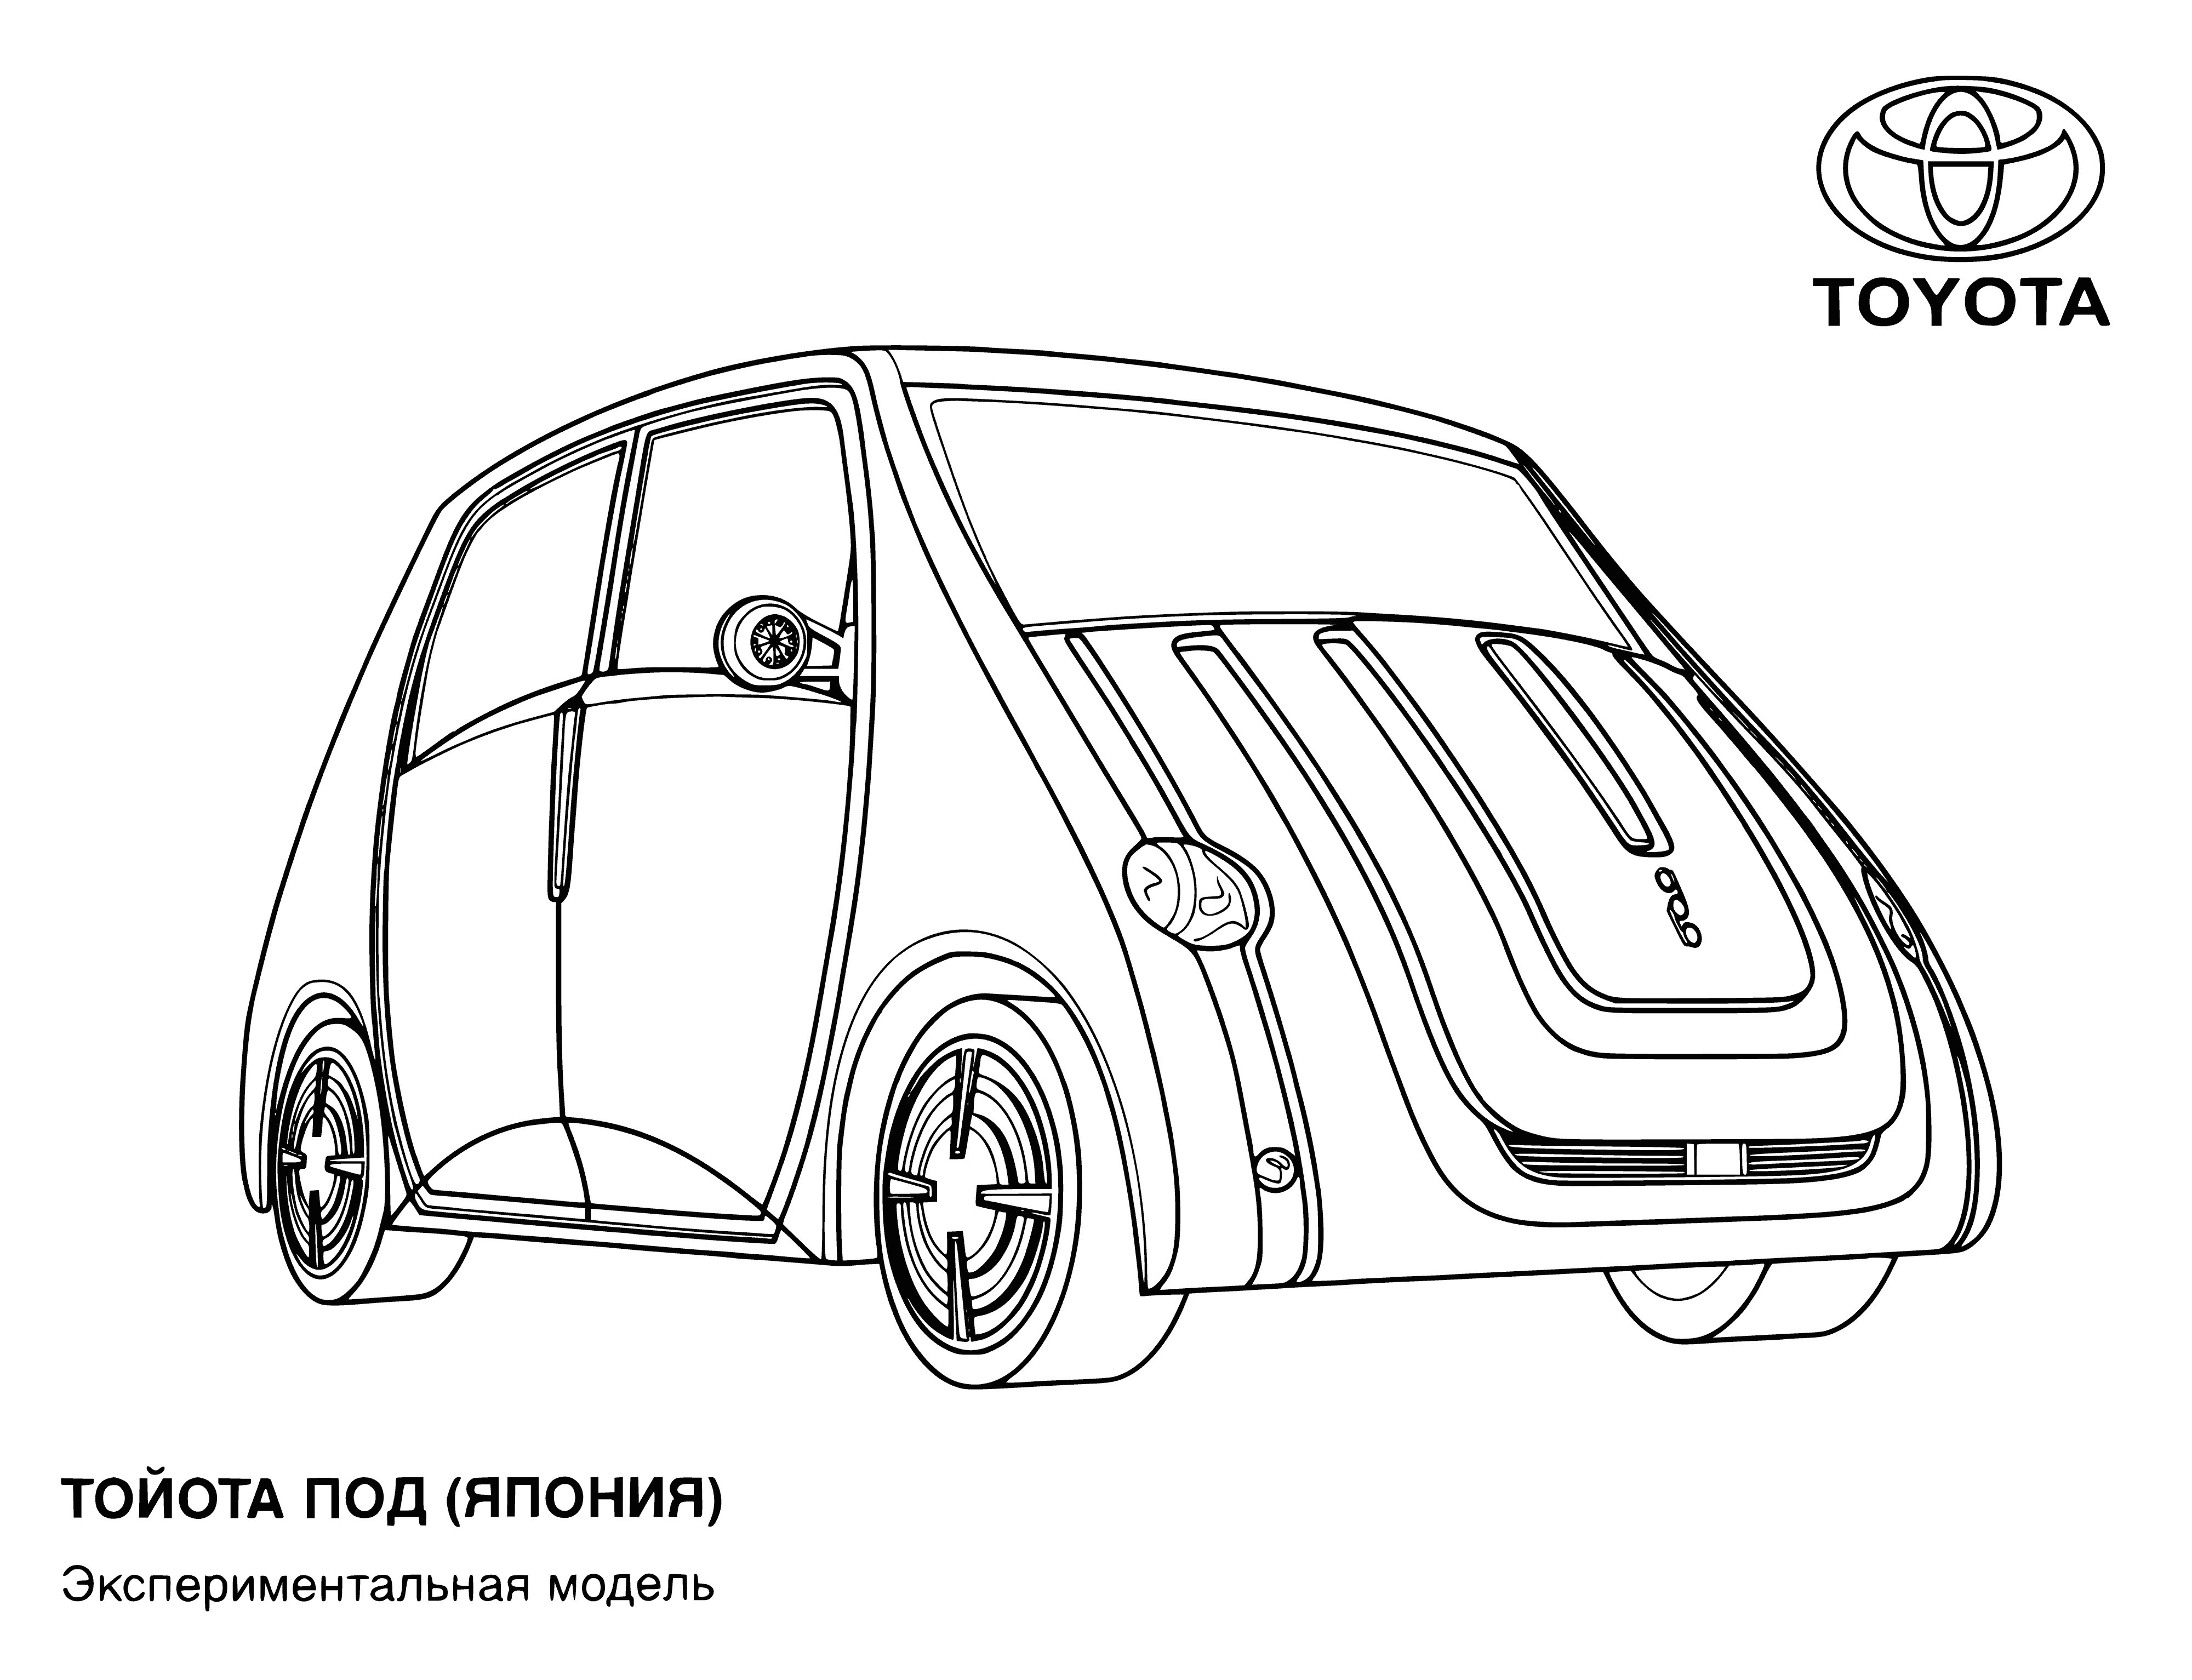 coloring page: 3 cars in coloring page: 2 red Camrys & 1 blue Corolla. All Toyota sedans. #Toyota #Coloring